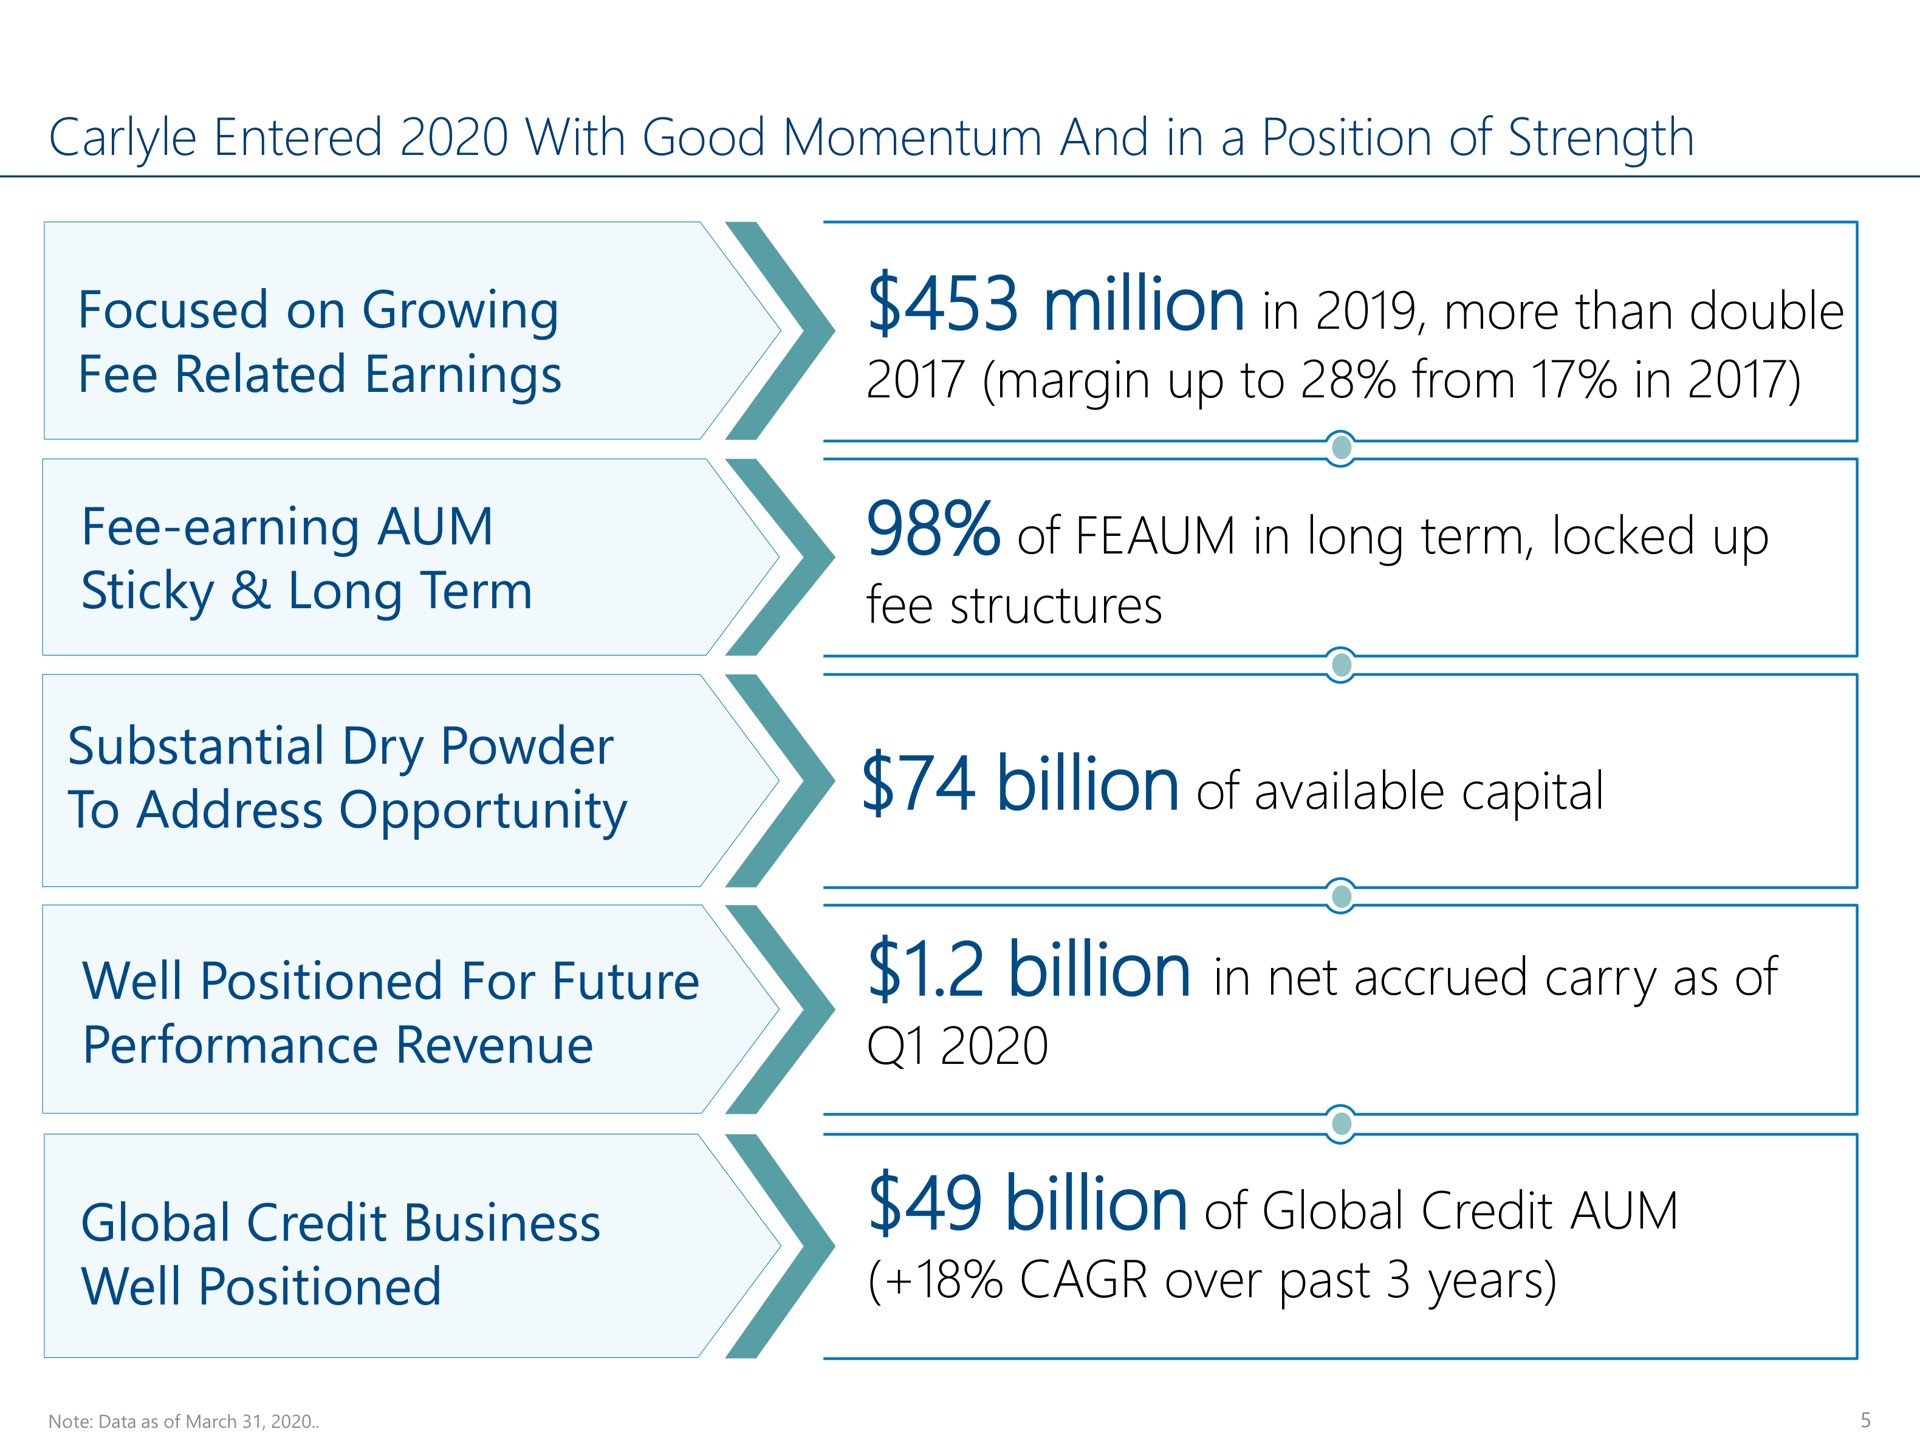 entered with good momentum and in a position of strength focused on growing fee related earnings million in more than double margin up to from in fee earning aum sticky long term of in long term locked up fee structures substantial dry powder to address opportunity billion of available capital well positioned for future performance revenue billion in net accrued carry as of global credit business well positioned billion of global credit aum over past years | Carlyle